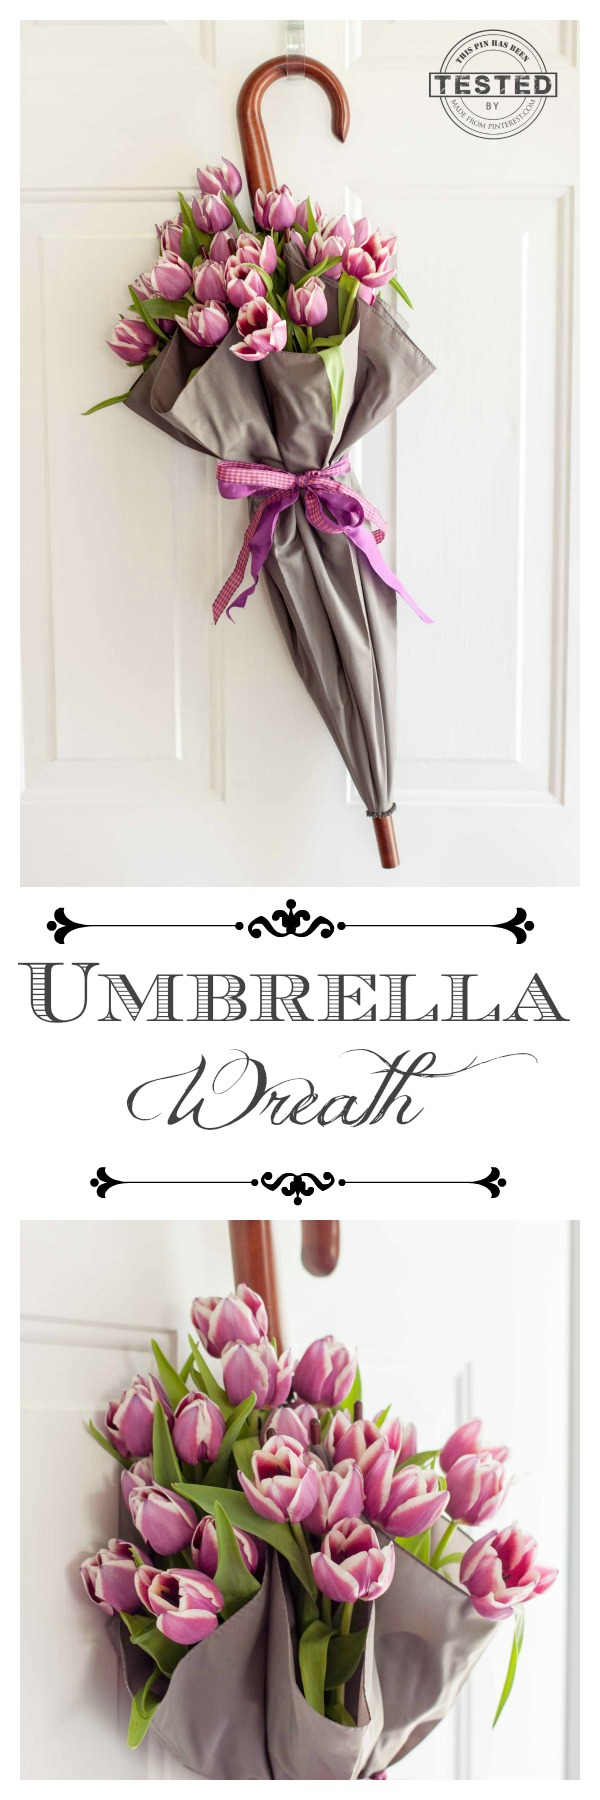 This Umbrella Wreath is easy to make. Great tip for using fresh flowers!